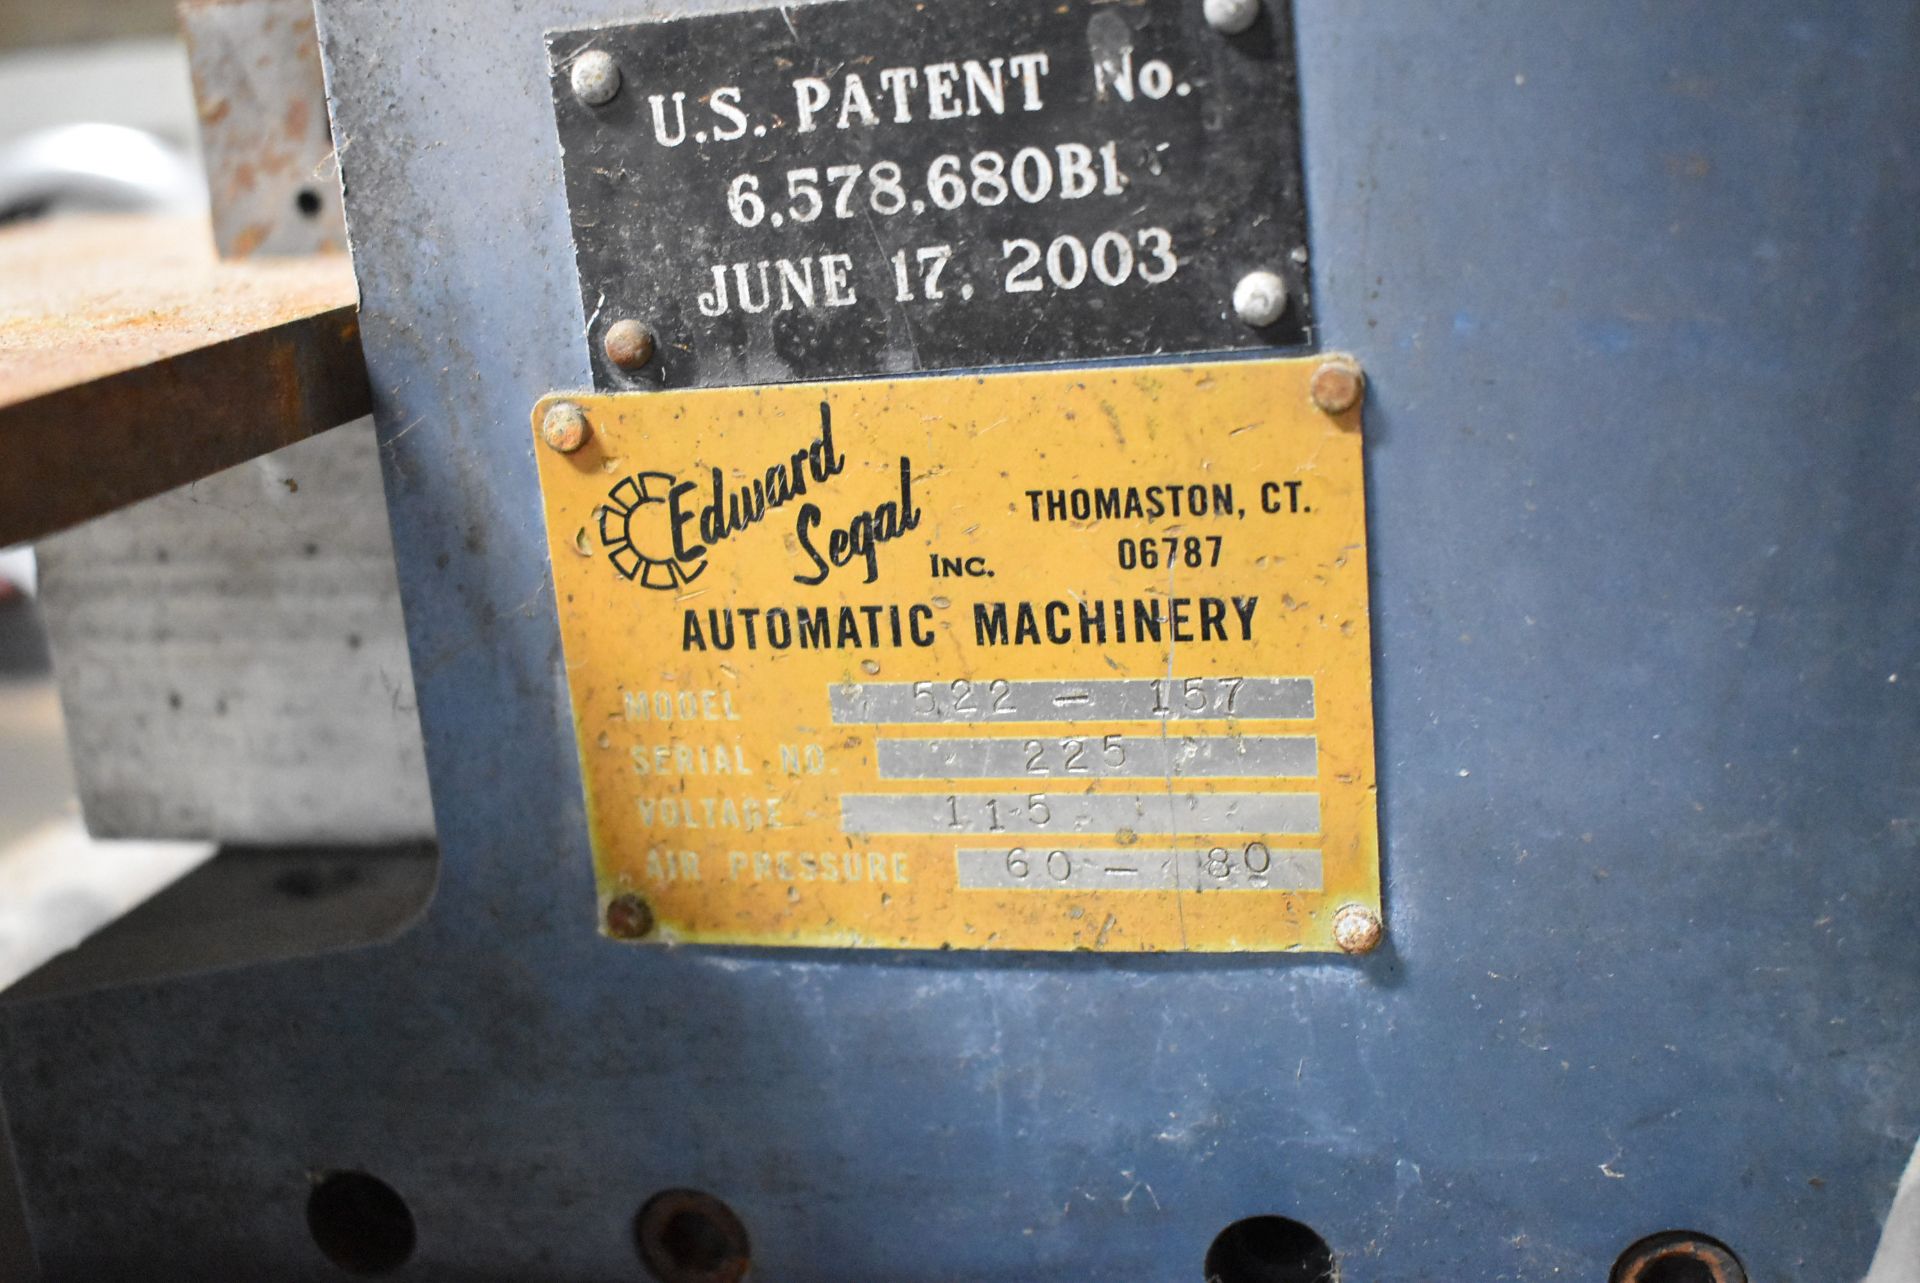 EDWARD SEGAL 522-157 PNEUMATIC INSERTION PRESS, S/N: 225 (LOCATED AT 115 RIDGETOP RD, SCARBOROUGH, - Image 5 of 5